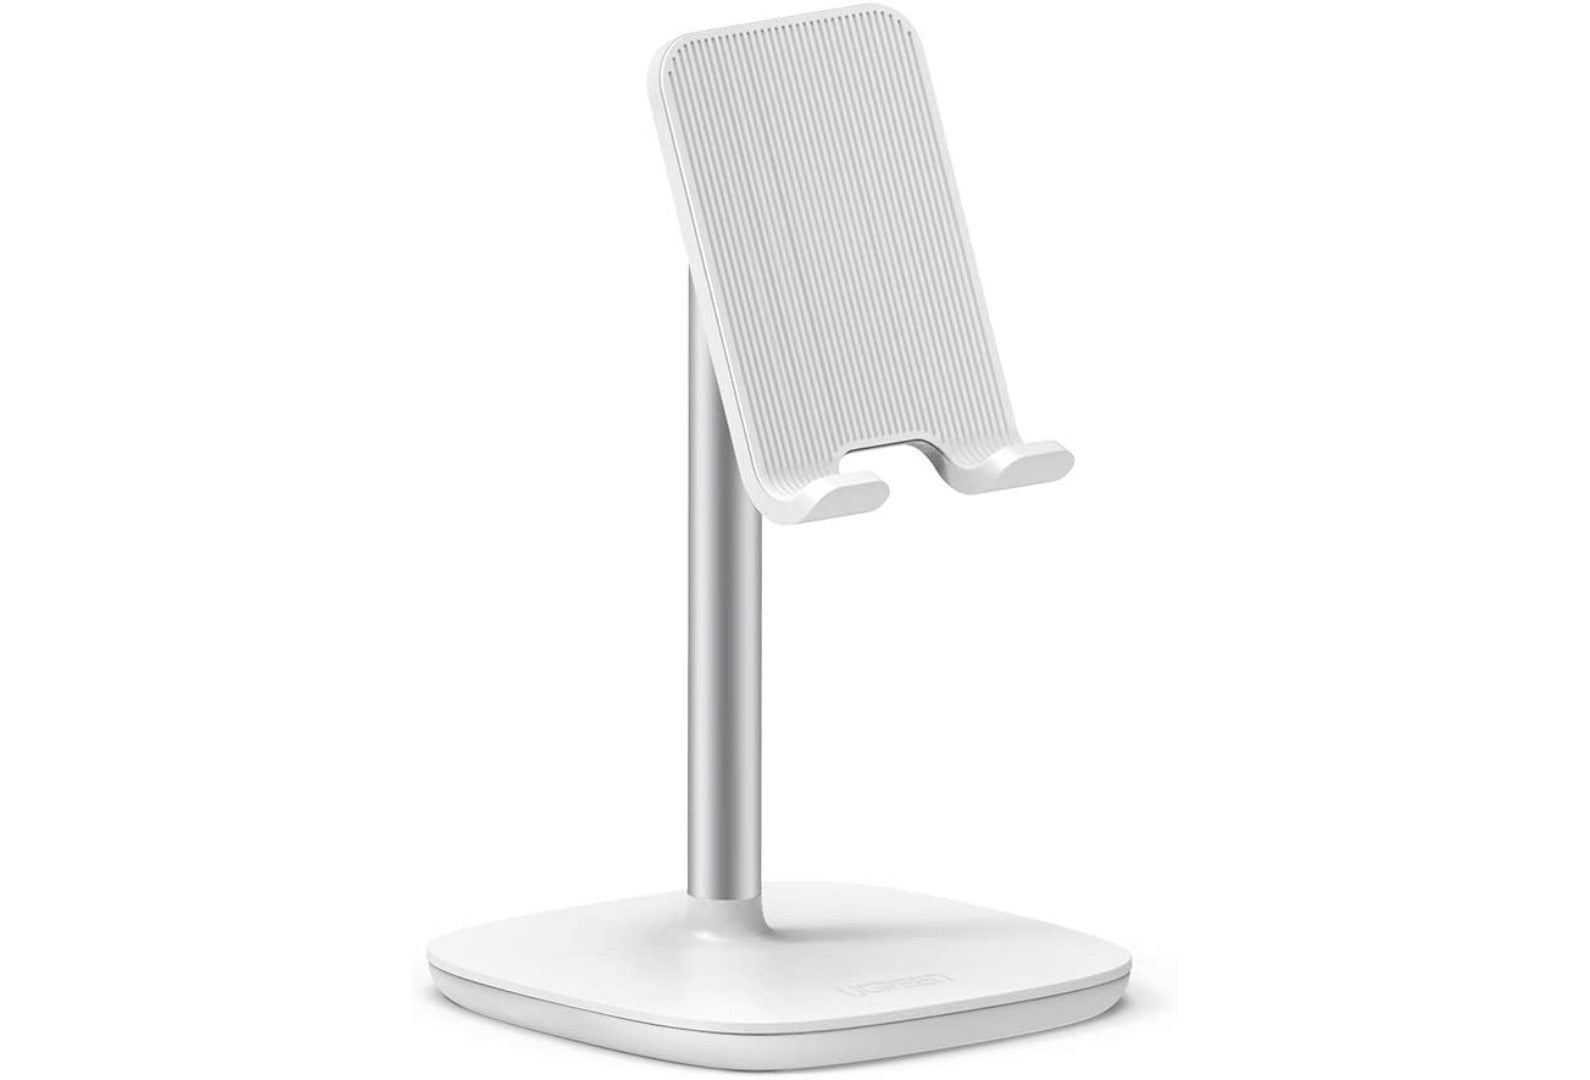 Cellphone Stand Office Adjustable Mobile Phone Holder - White.